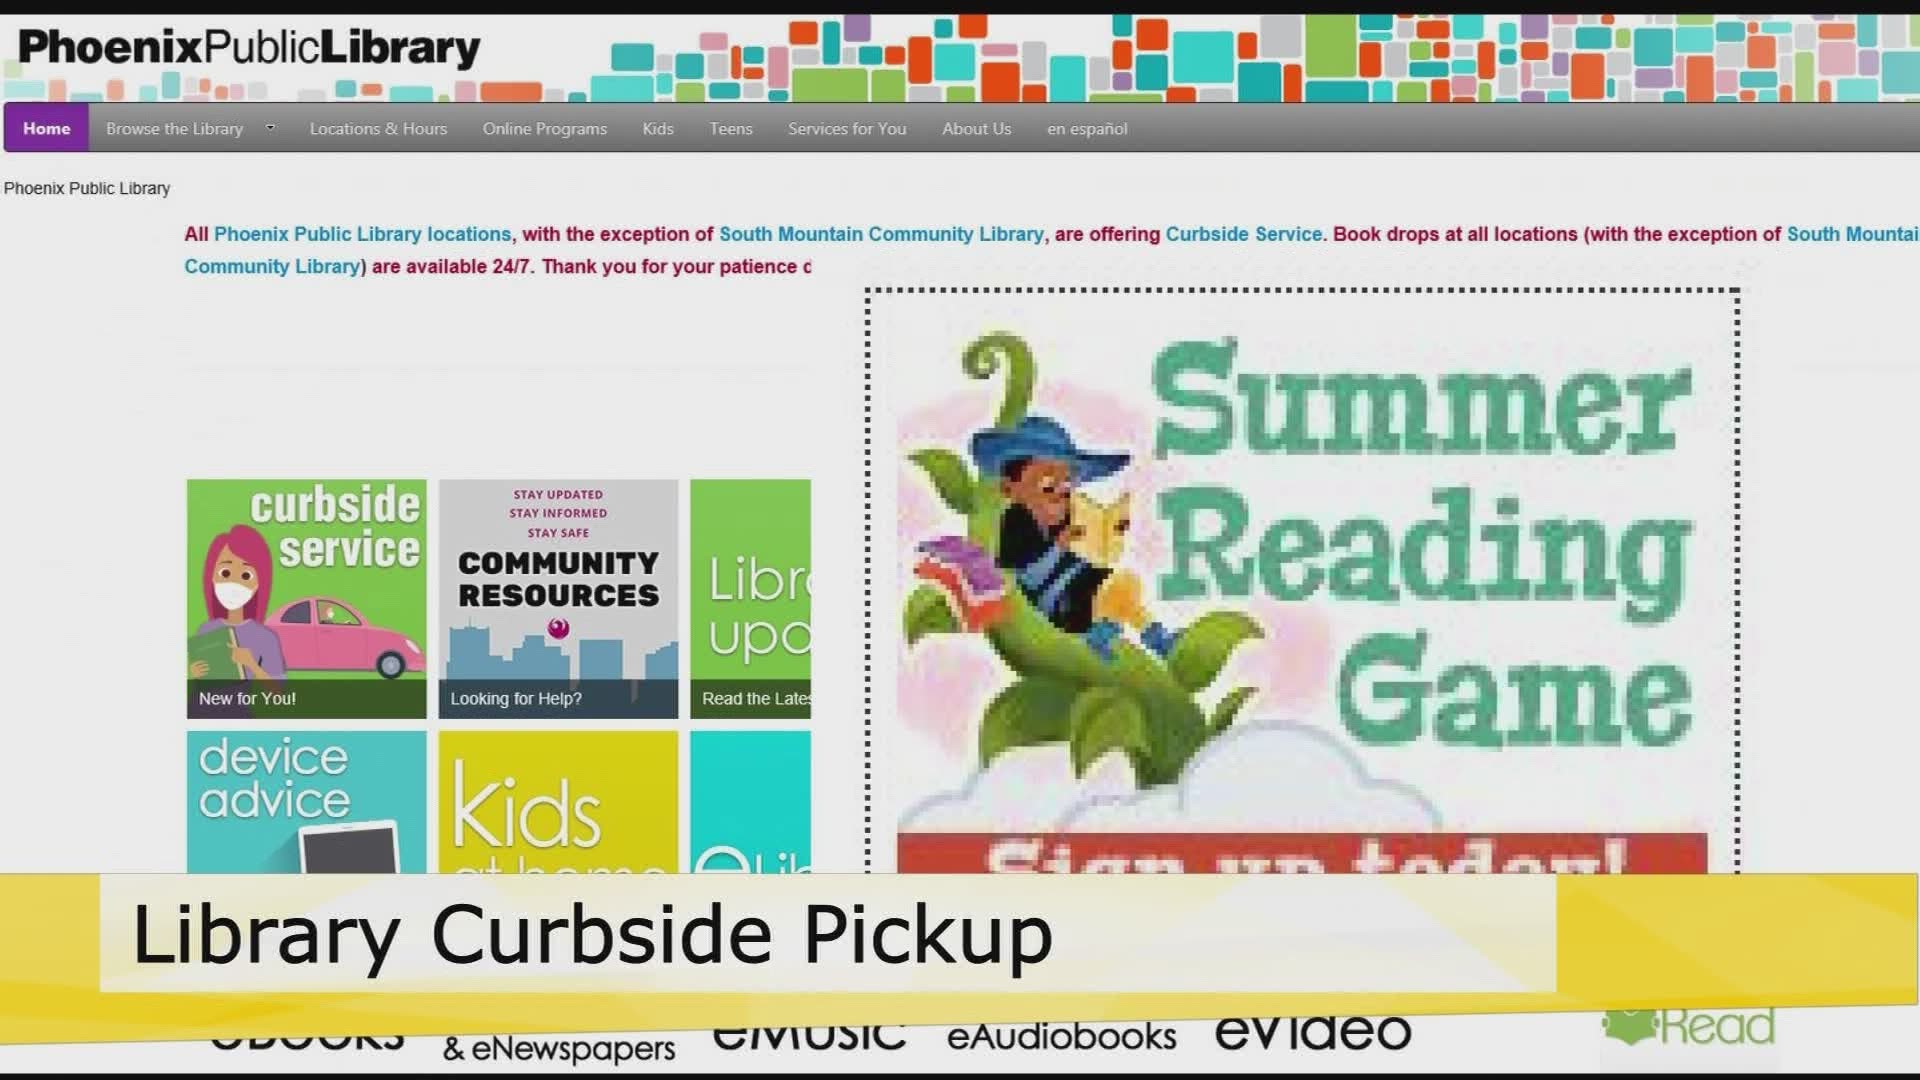 Gerry with Phoenix Public Library gives us the scoop on curbside pick-up plus how the kids can get in on the "Summer Reading Challenge"